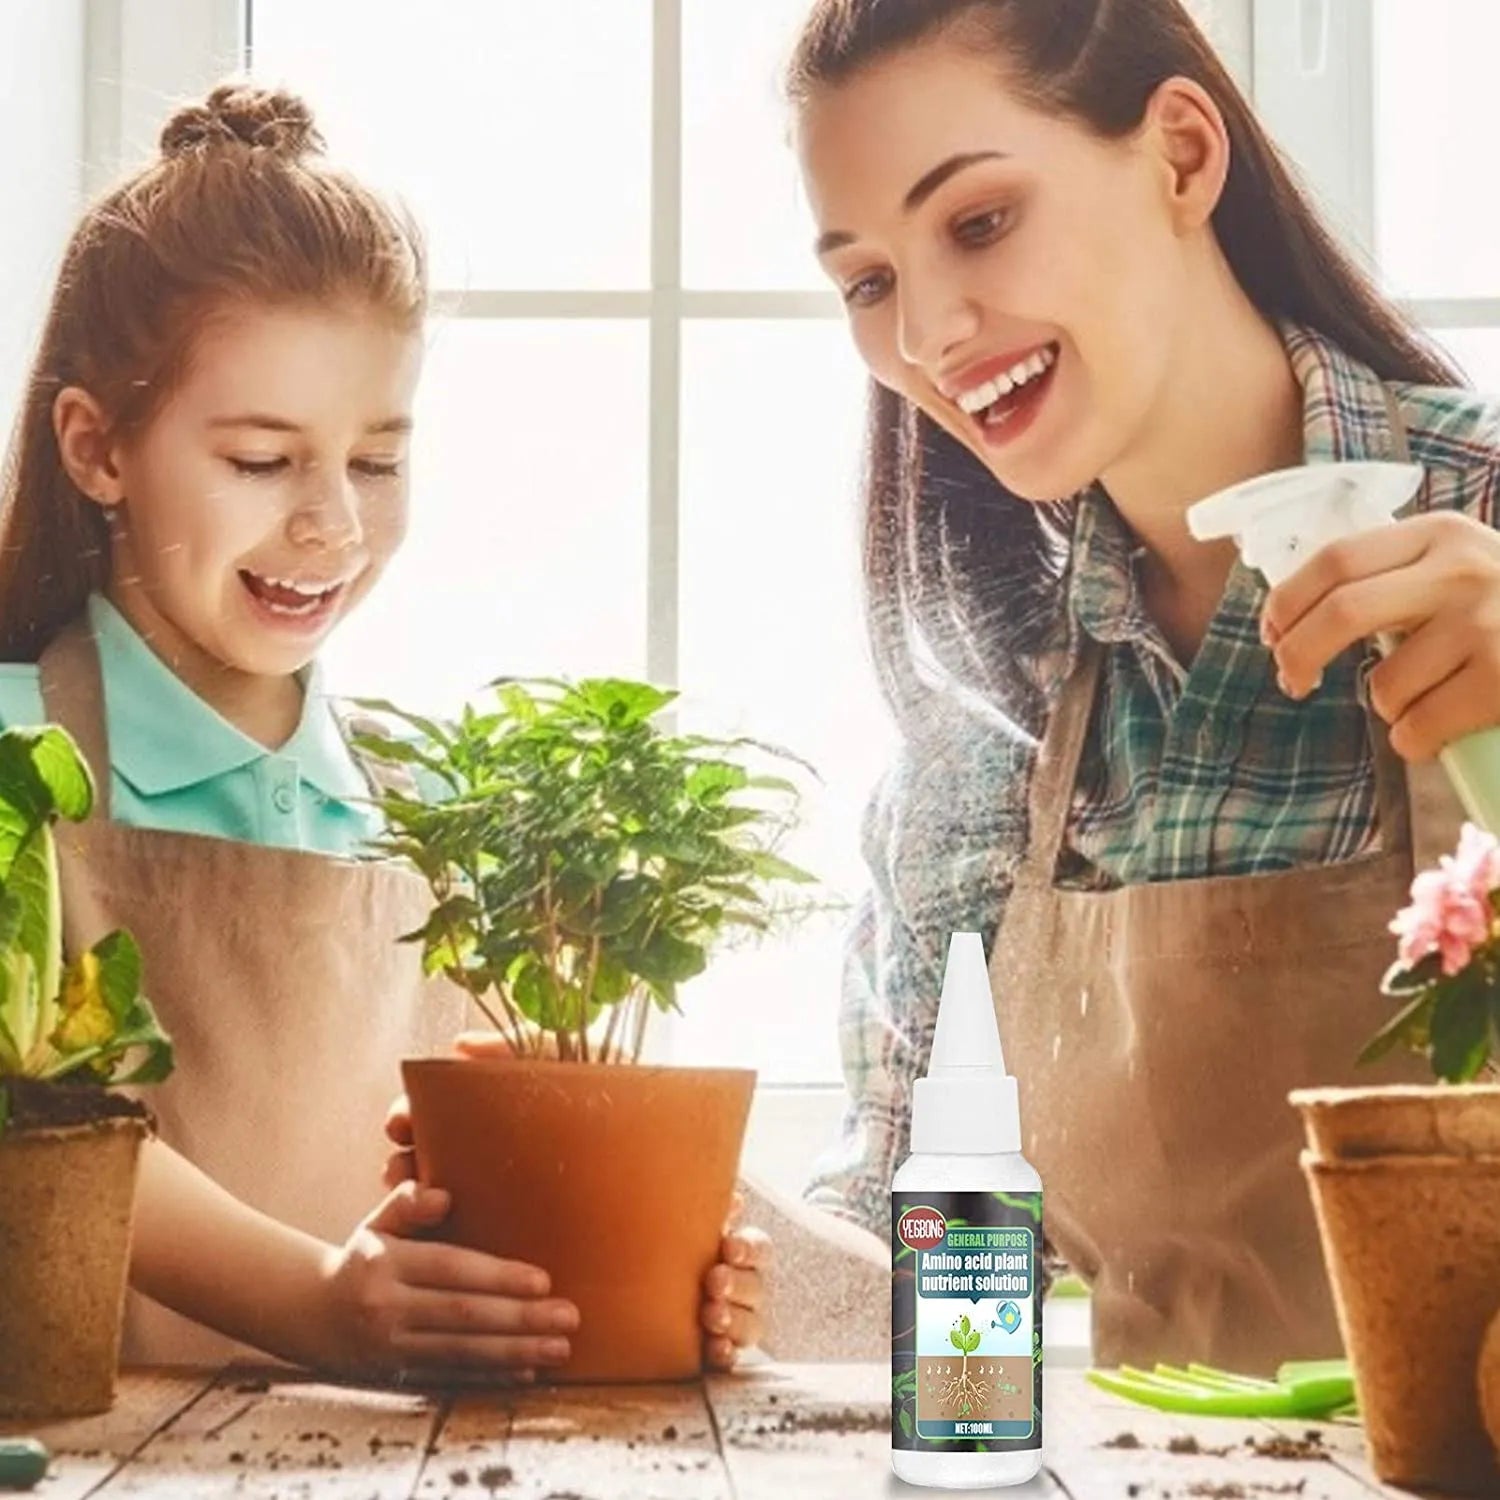 ✨BUY 3 GET 2 FREE✨ PLANT NUTRIENT SOLUTION✨ SPRING HOT SALE 50% OFF